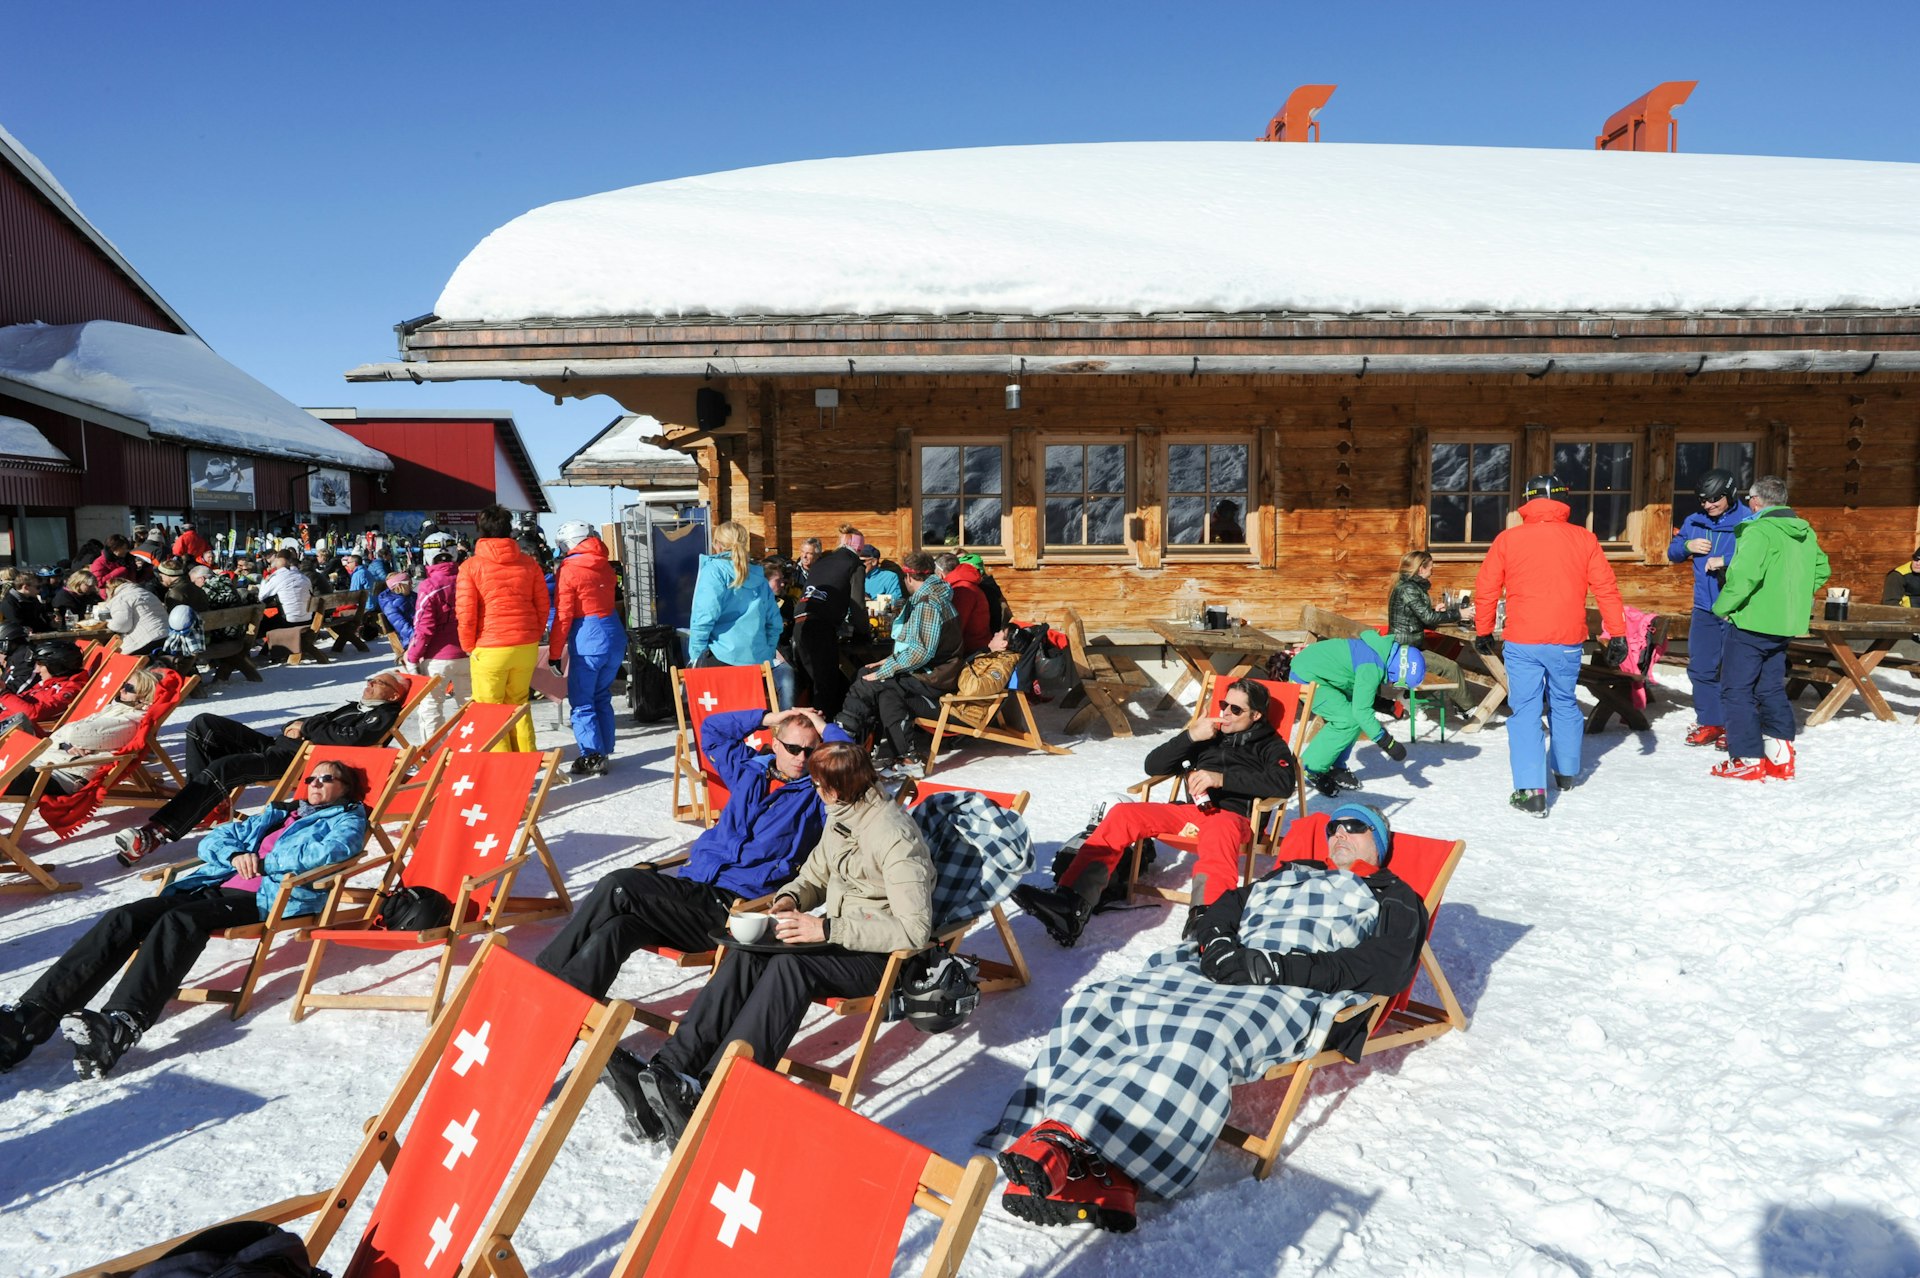 Skiers rest on deckchairs in the snow at the restaurant on mount Titlis